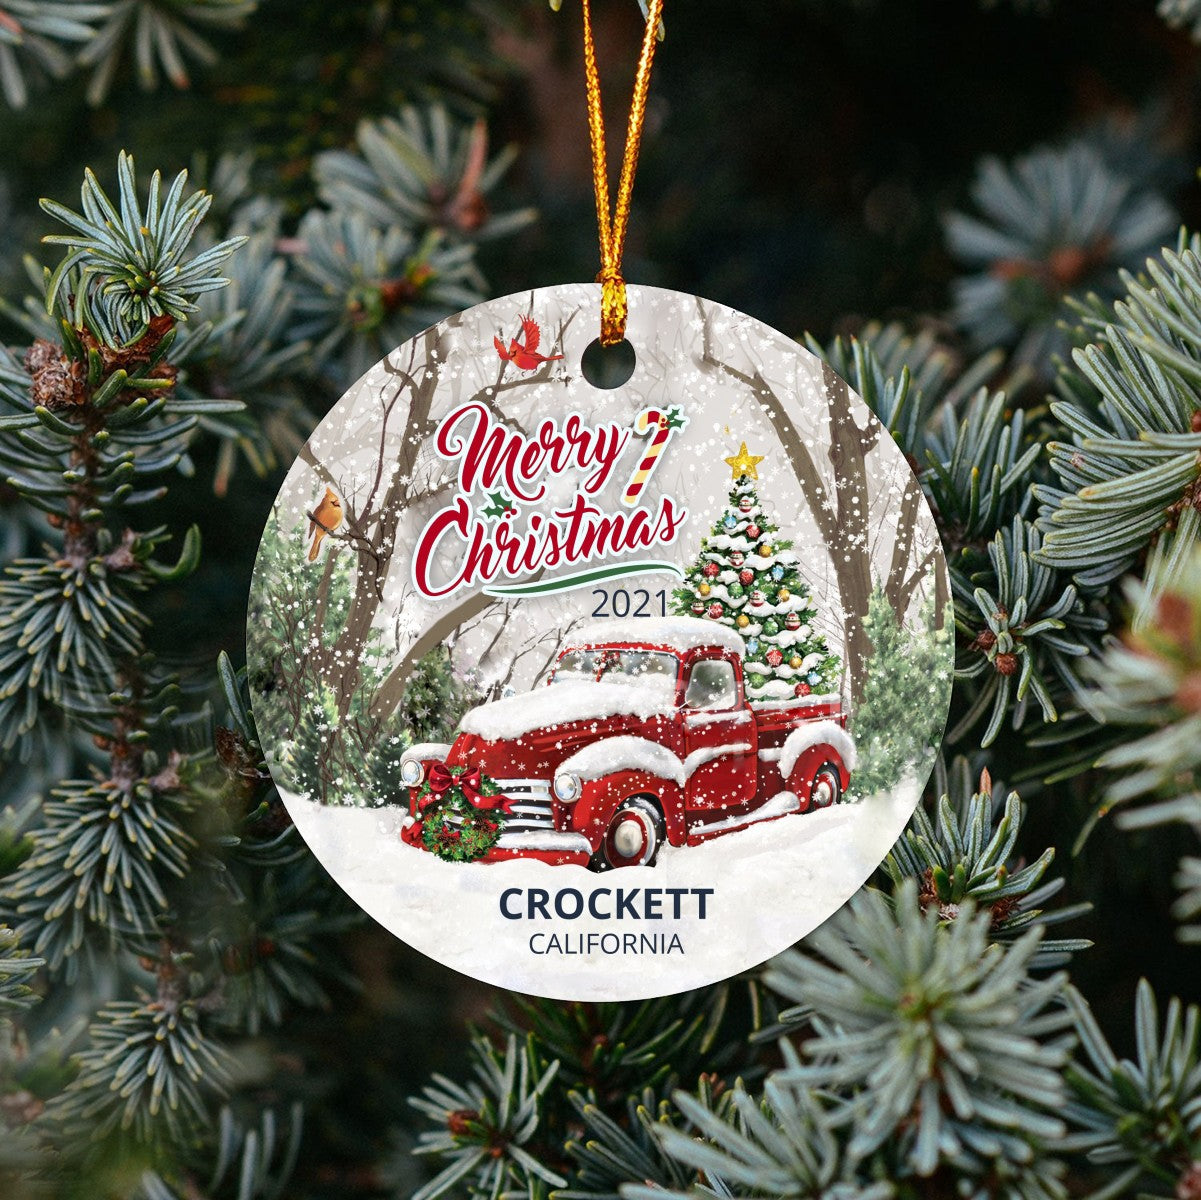 Christmas Tree Ornaments Crockett - Ornament With Name City, State Crockett California CA Ornament - Red Truck Xmas Ornaments 3'' Plastic Gift For Family, Friend And Housewarming